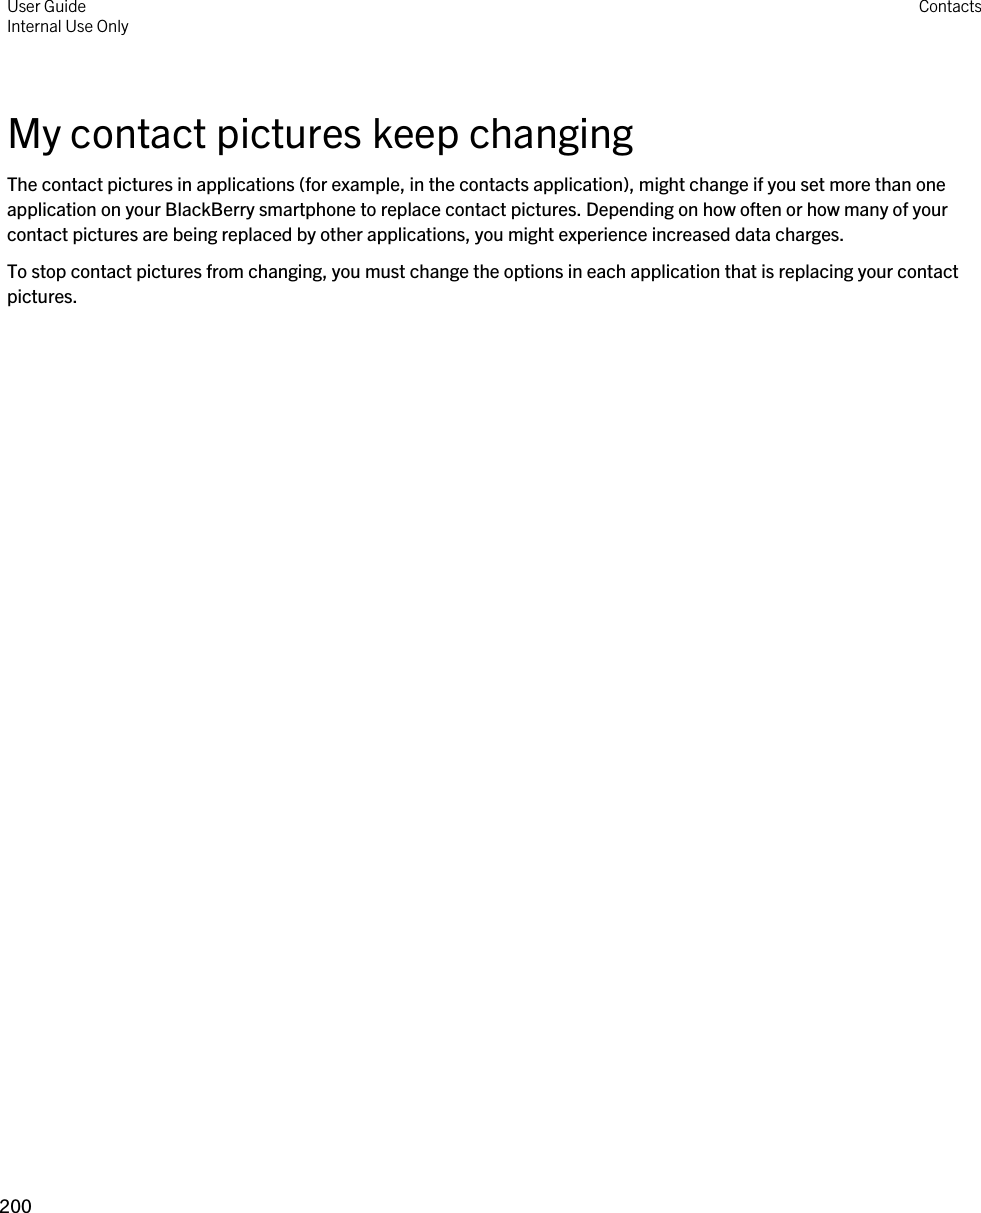 My contact pictures keep changingThe contact pictures in applications (for example, in the contacts application), might change if you set more than one application on your BlackBerry smartphone to replace contact pictures. Depending on how often or how many of your contact pictures are being replaced by other applications, you might experience increased data charges.To stop contact pictures from changing, you must change the options in each application that is replacing your contact pictures.User GuideInternal Use Only Contacts200 